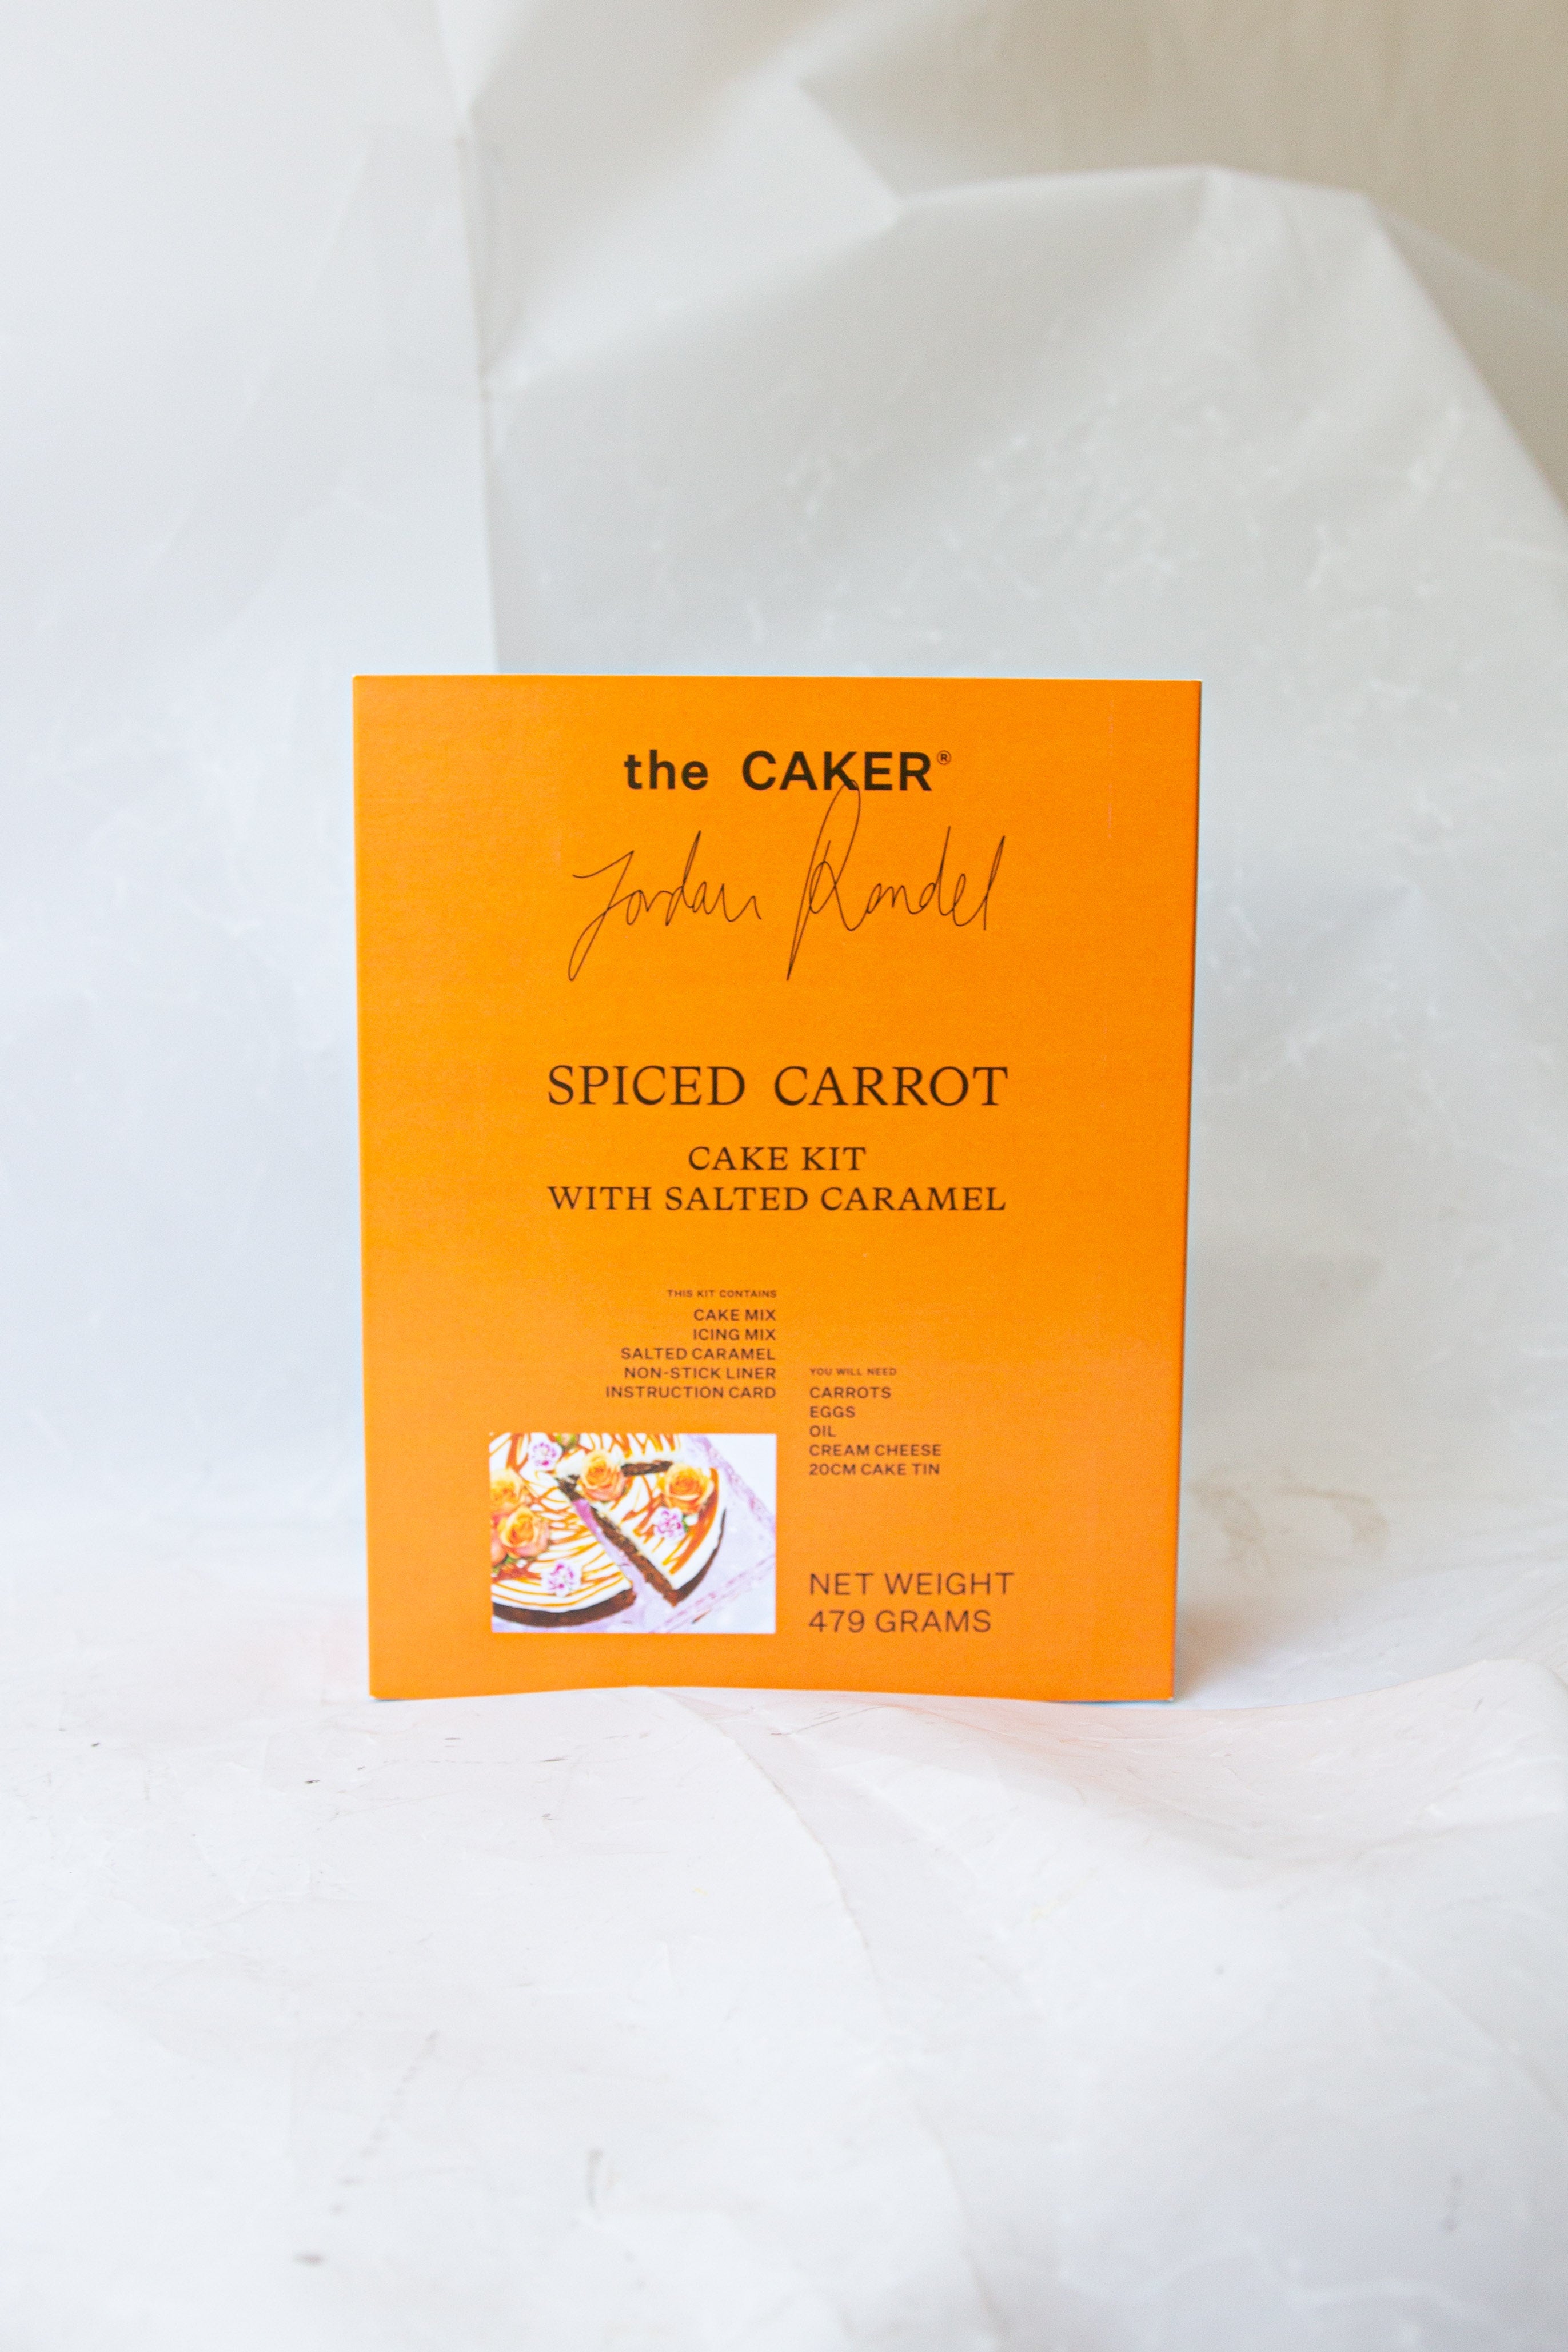 Spiced Carrot with Salted Caramel Cake Kit